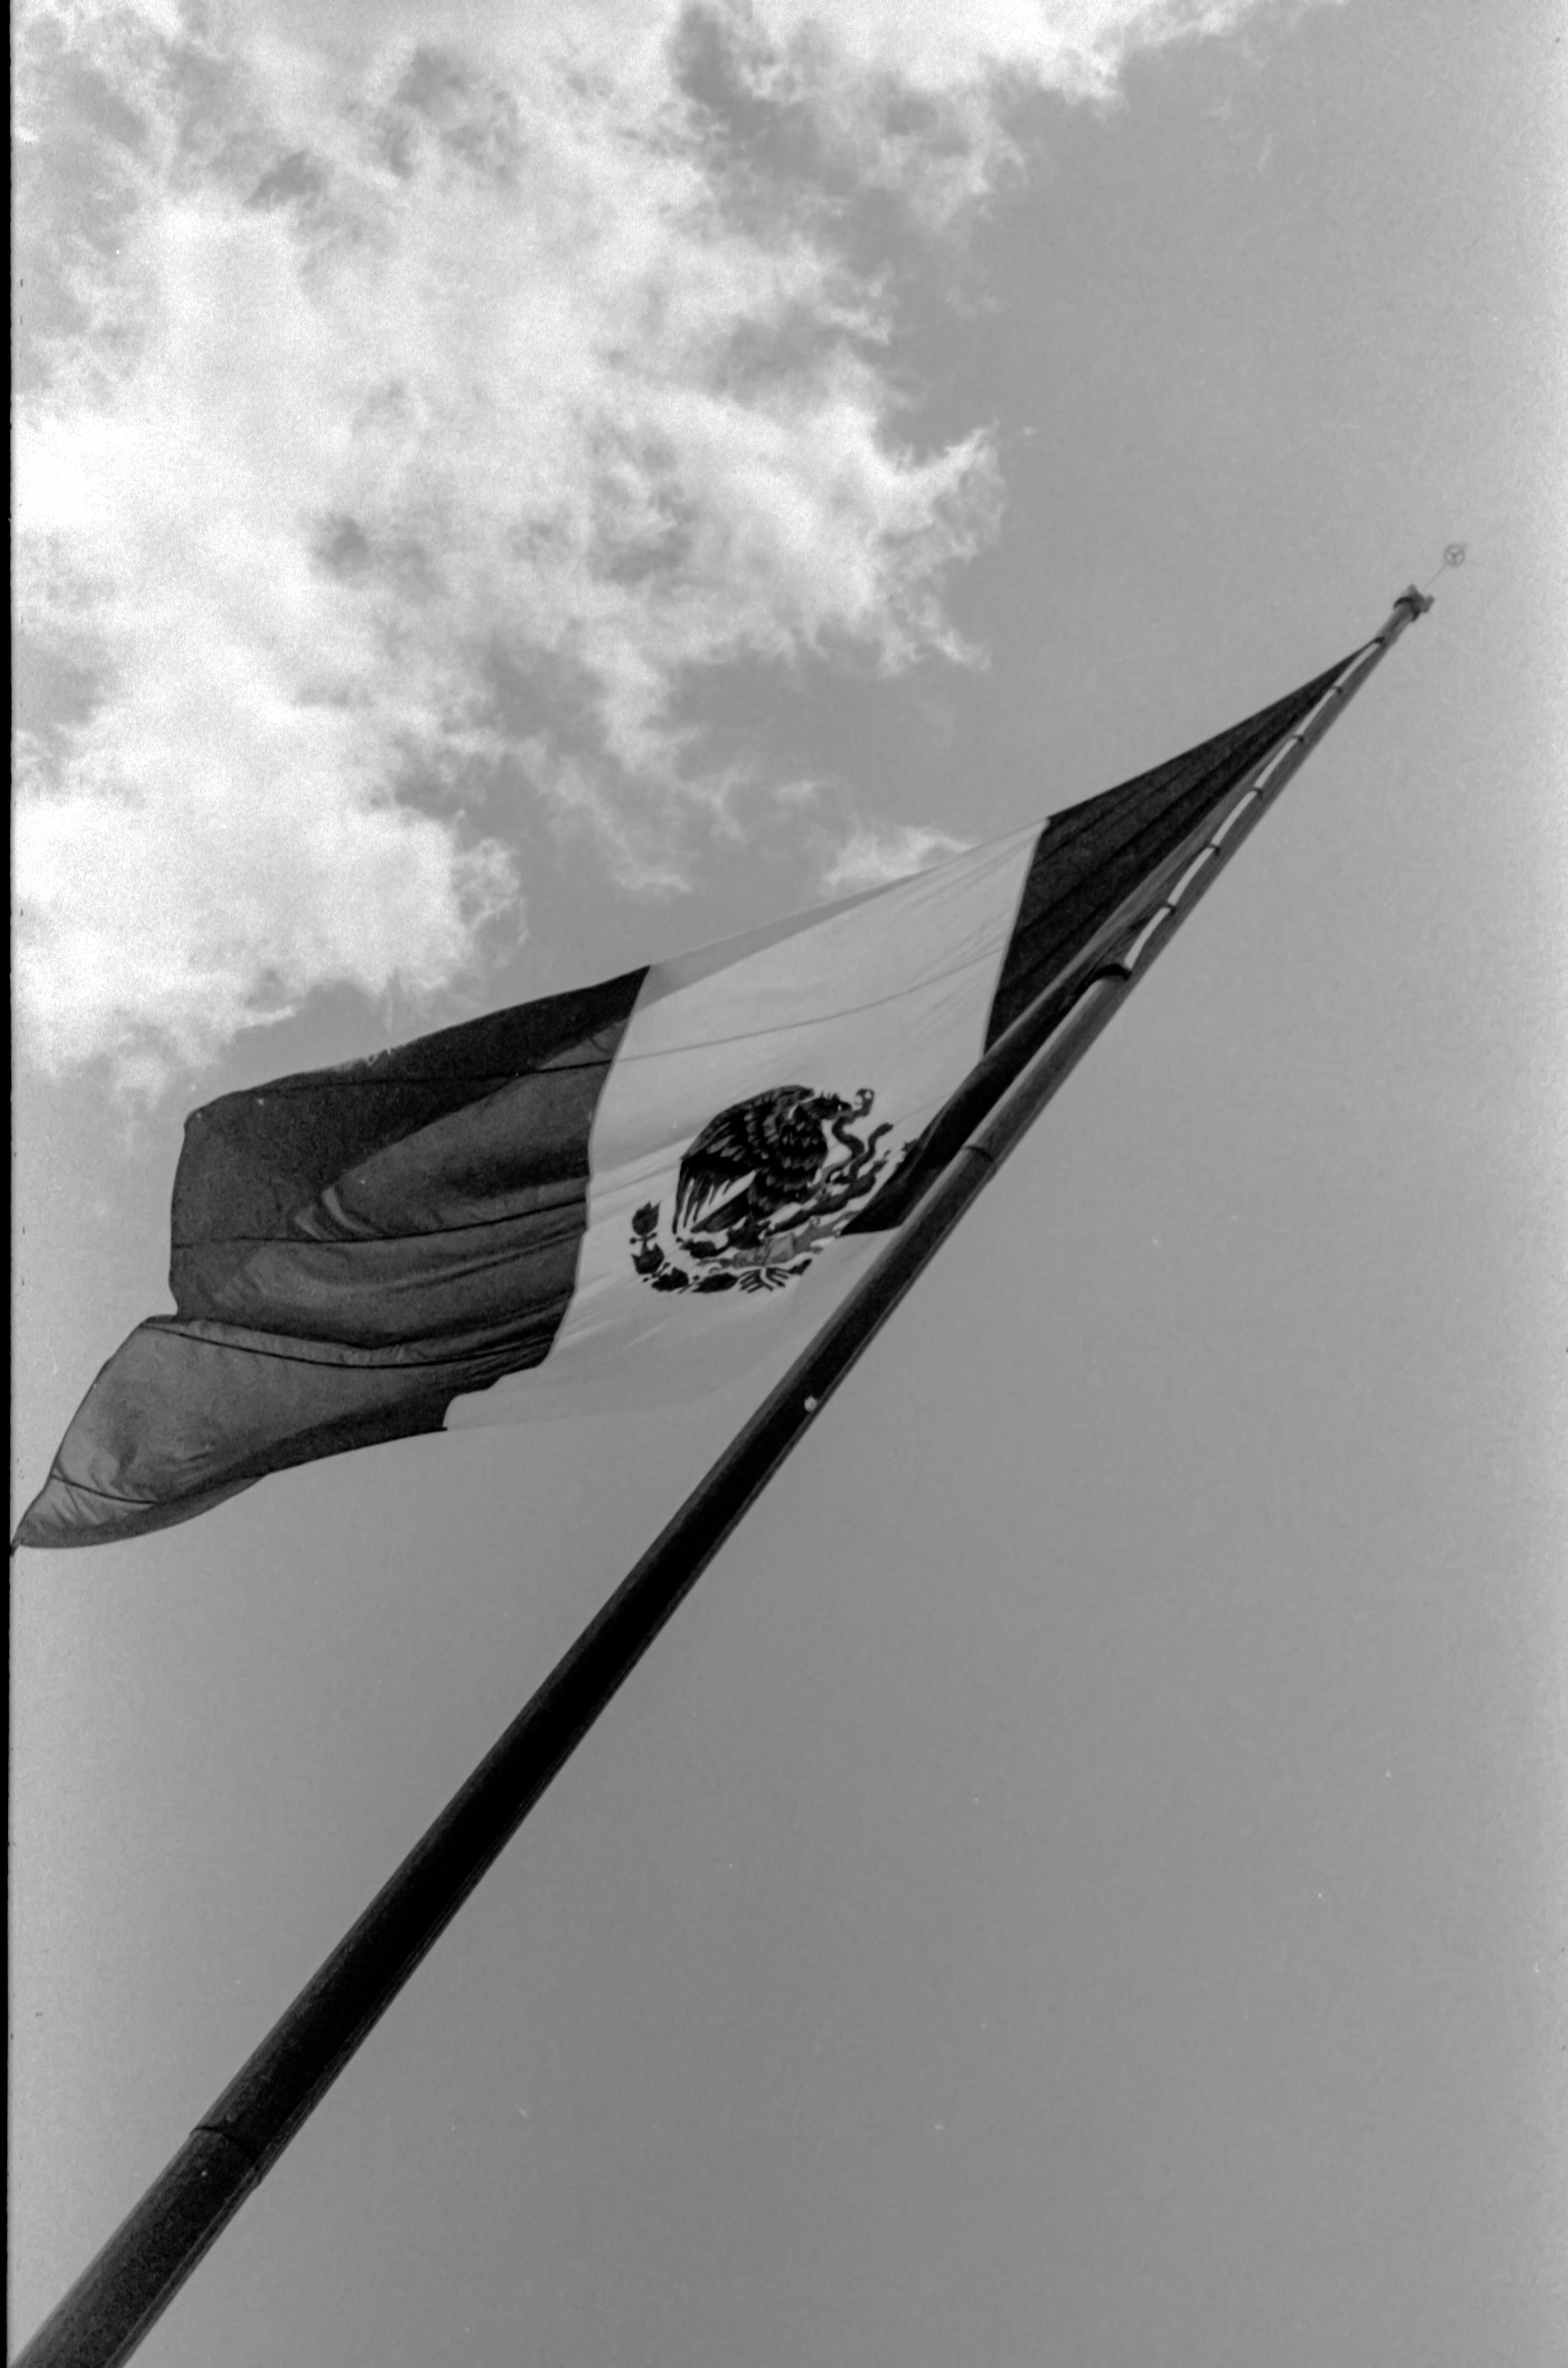 Mexican Flag Photos, Download The BEST Free Mexican Flag Stock